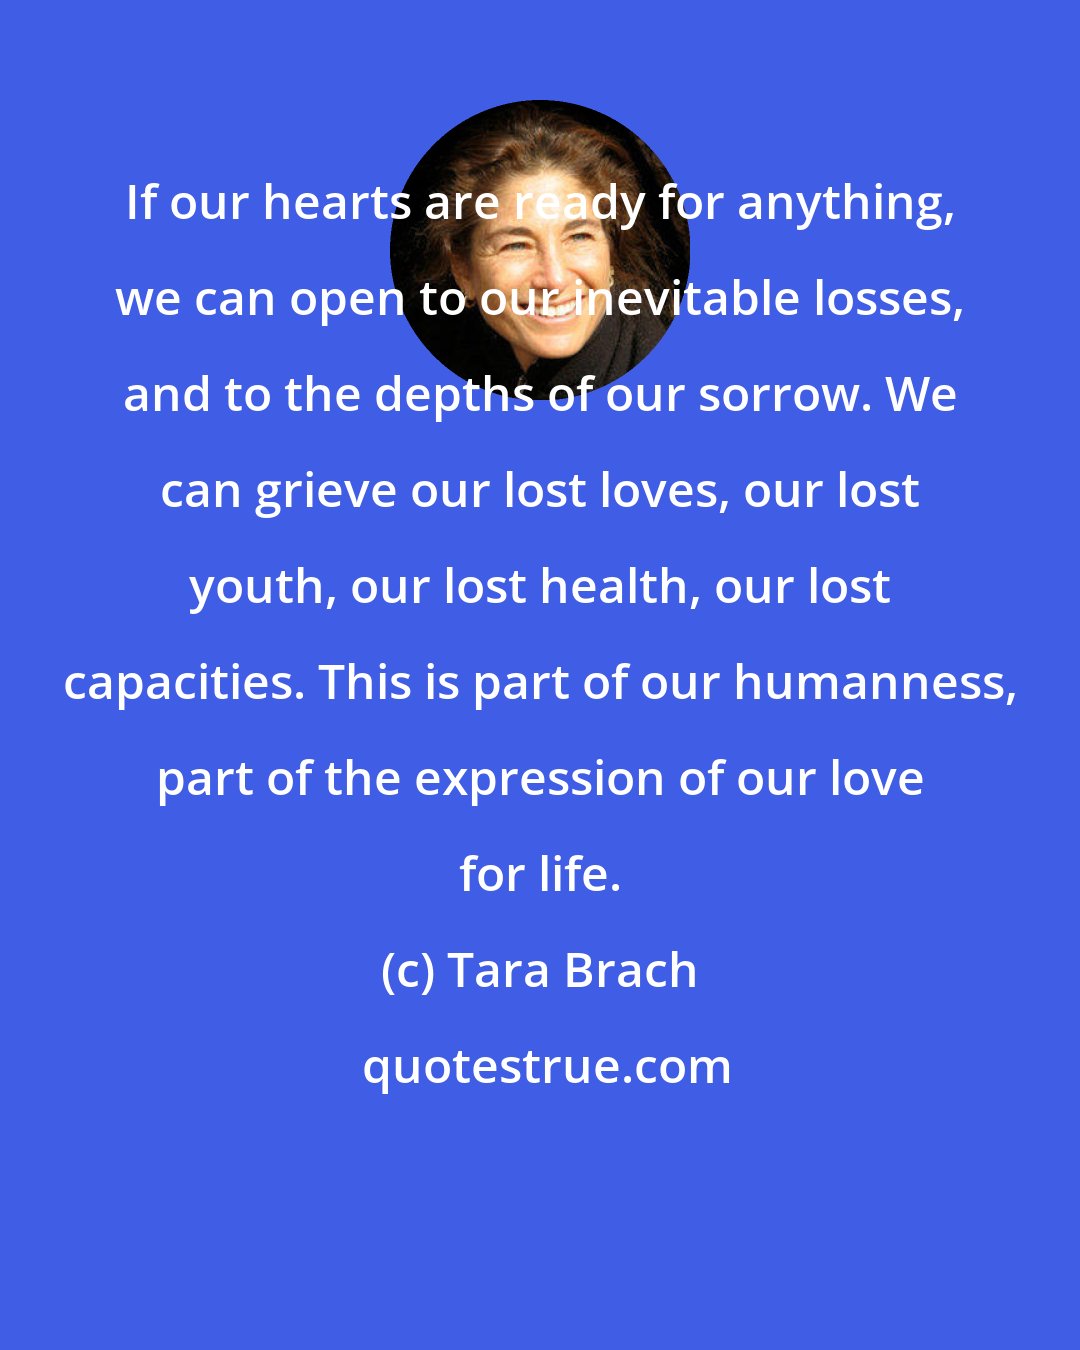 Tara Brach: If our hearts are ready for anything, we can open to our inevitable losses, and to the depths of our sorrow. We can grieve our lost loves, our lost youth, our lost health, our lost capacities. This is part of our humanness, part of the expression of our love for life.